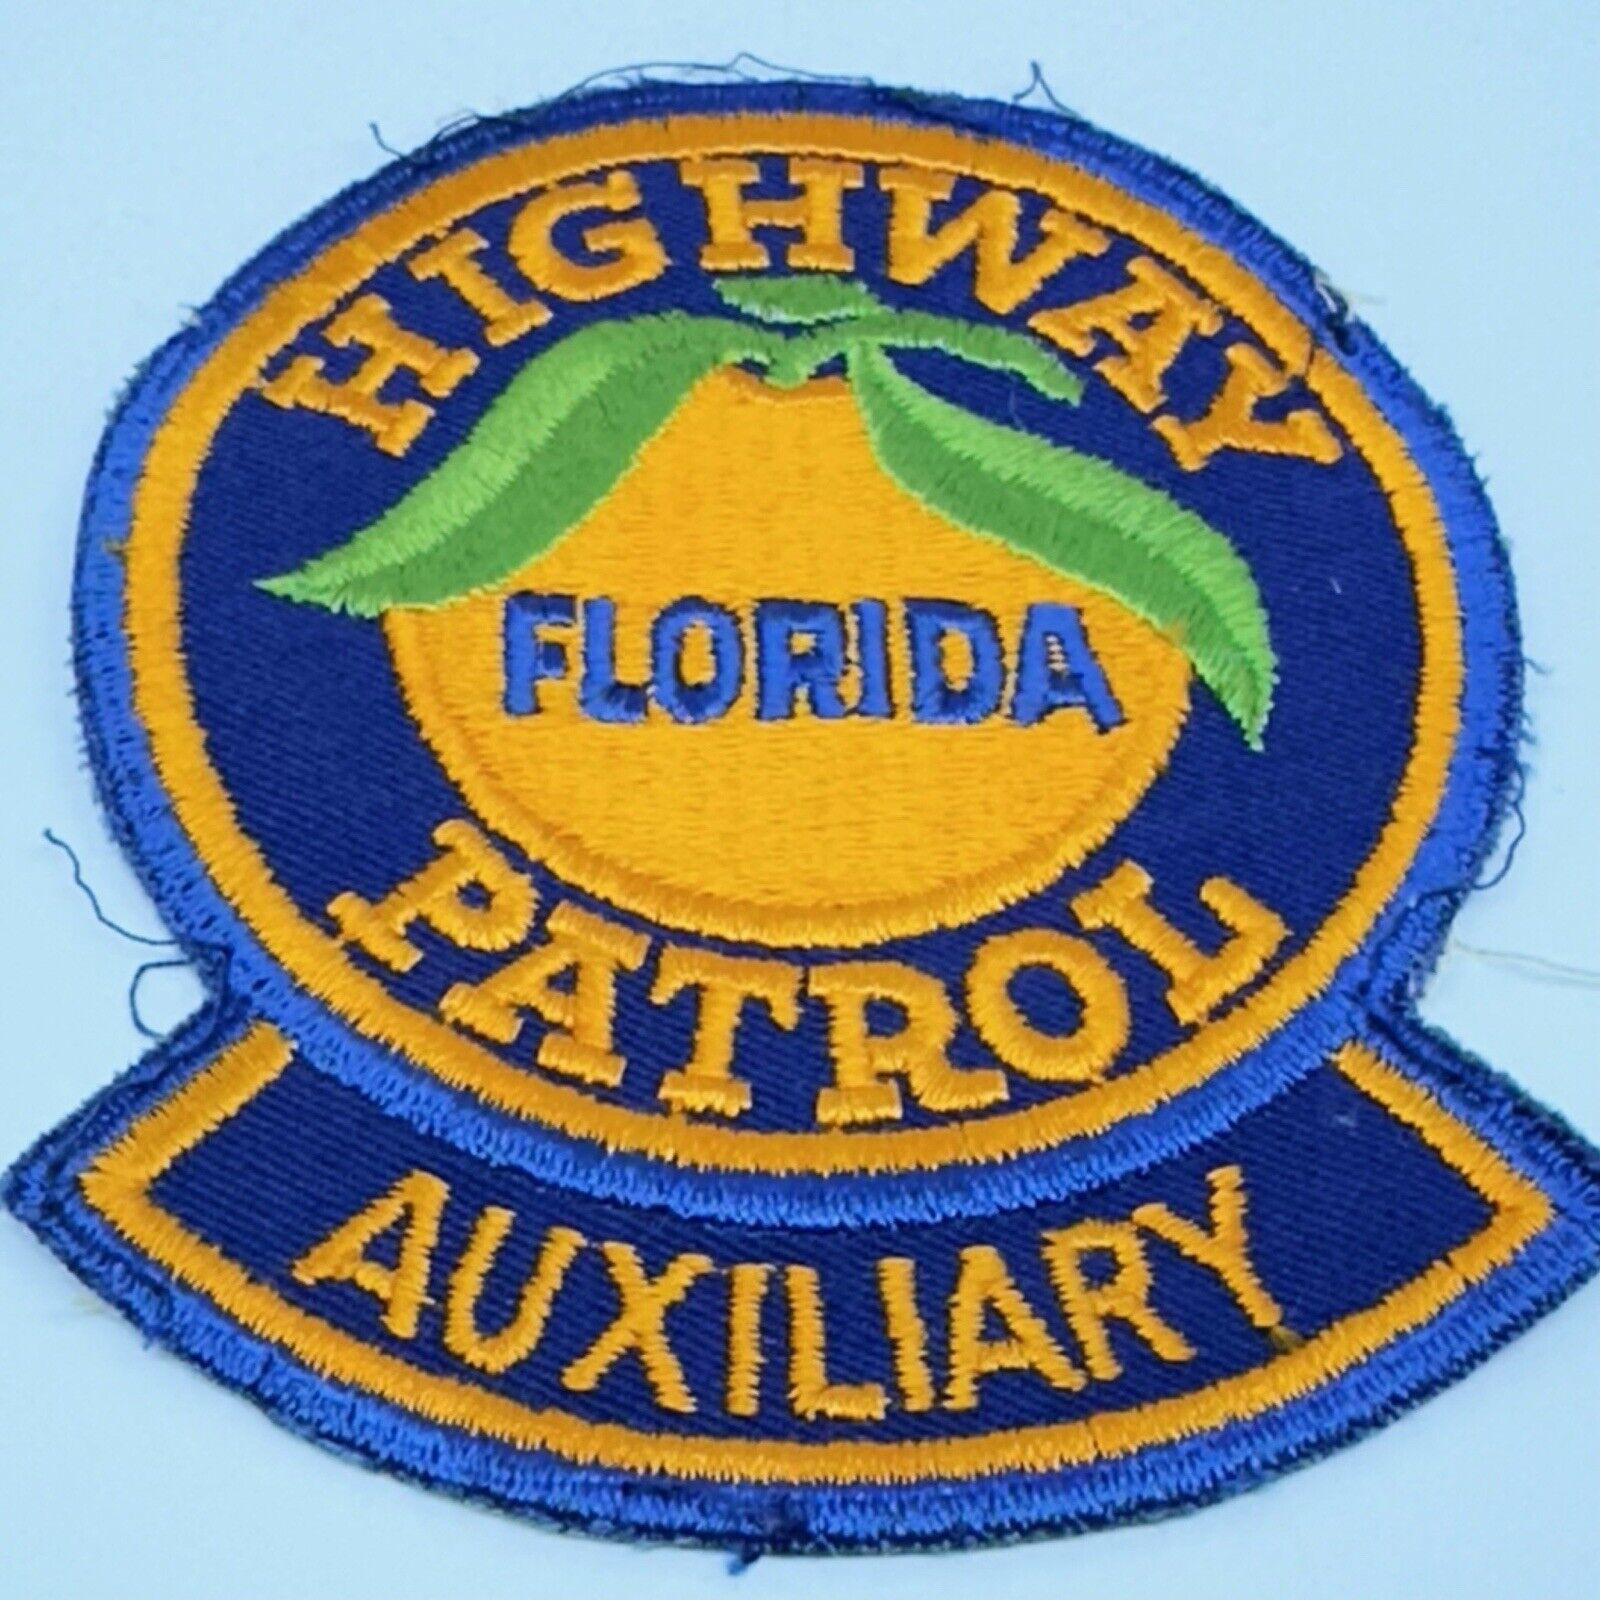 Florida Highway Patrol AUXILIARY Police Patch